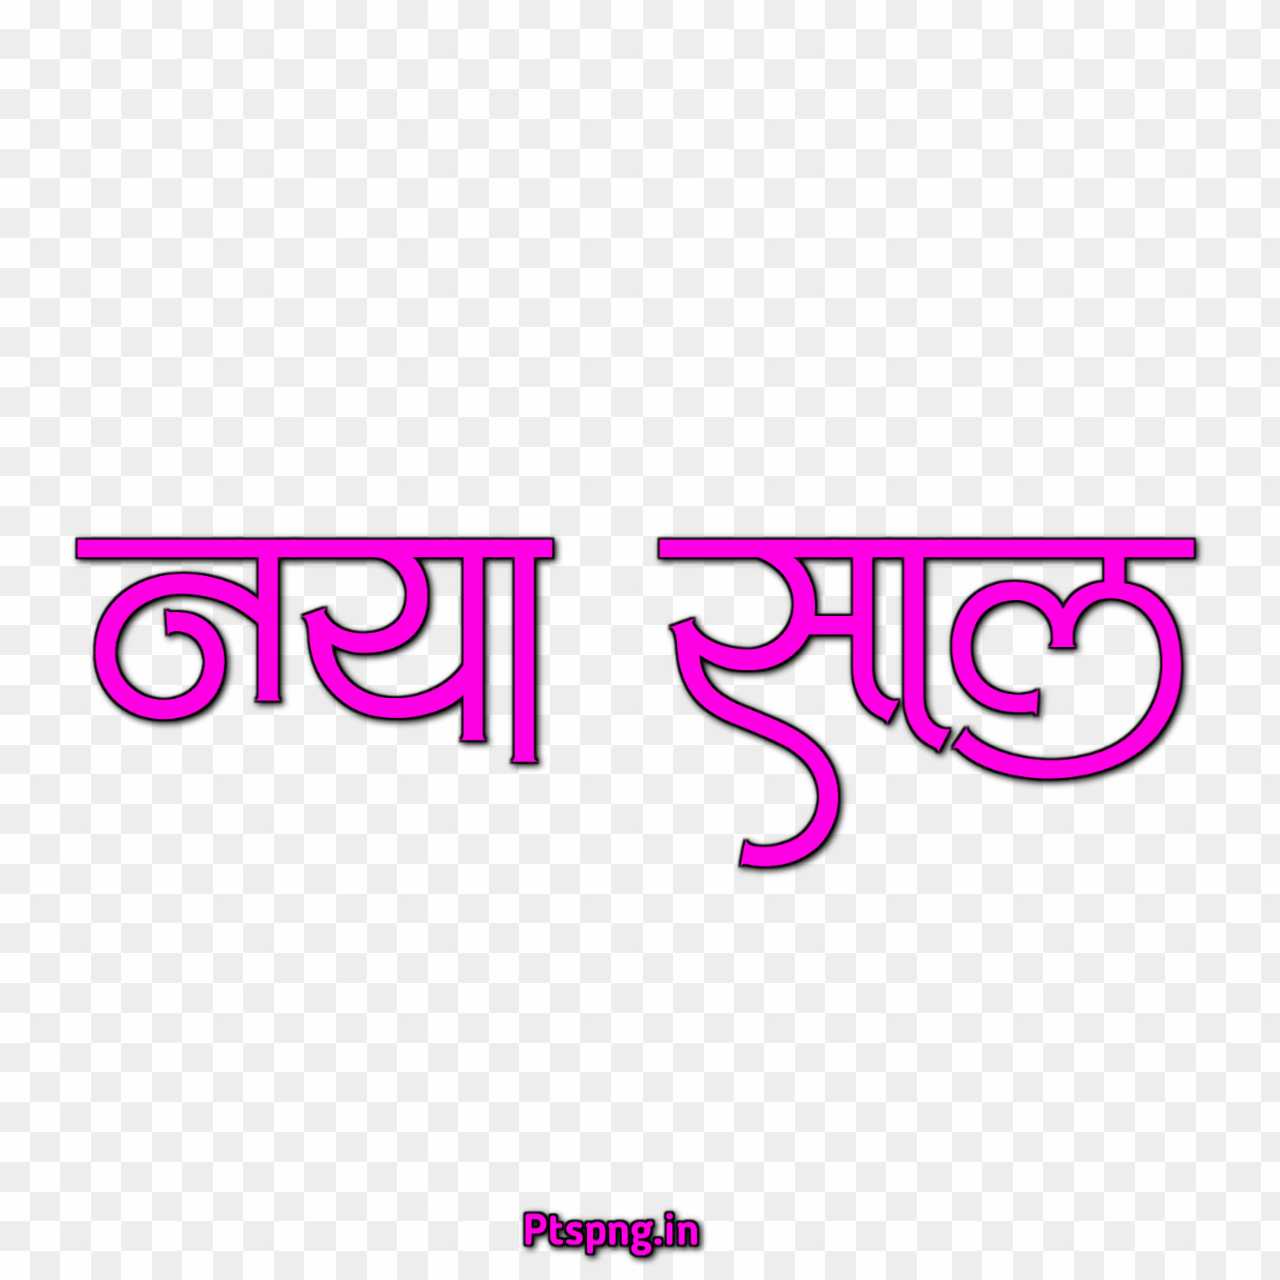 New year in Hindi text PNG images download